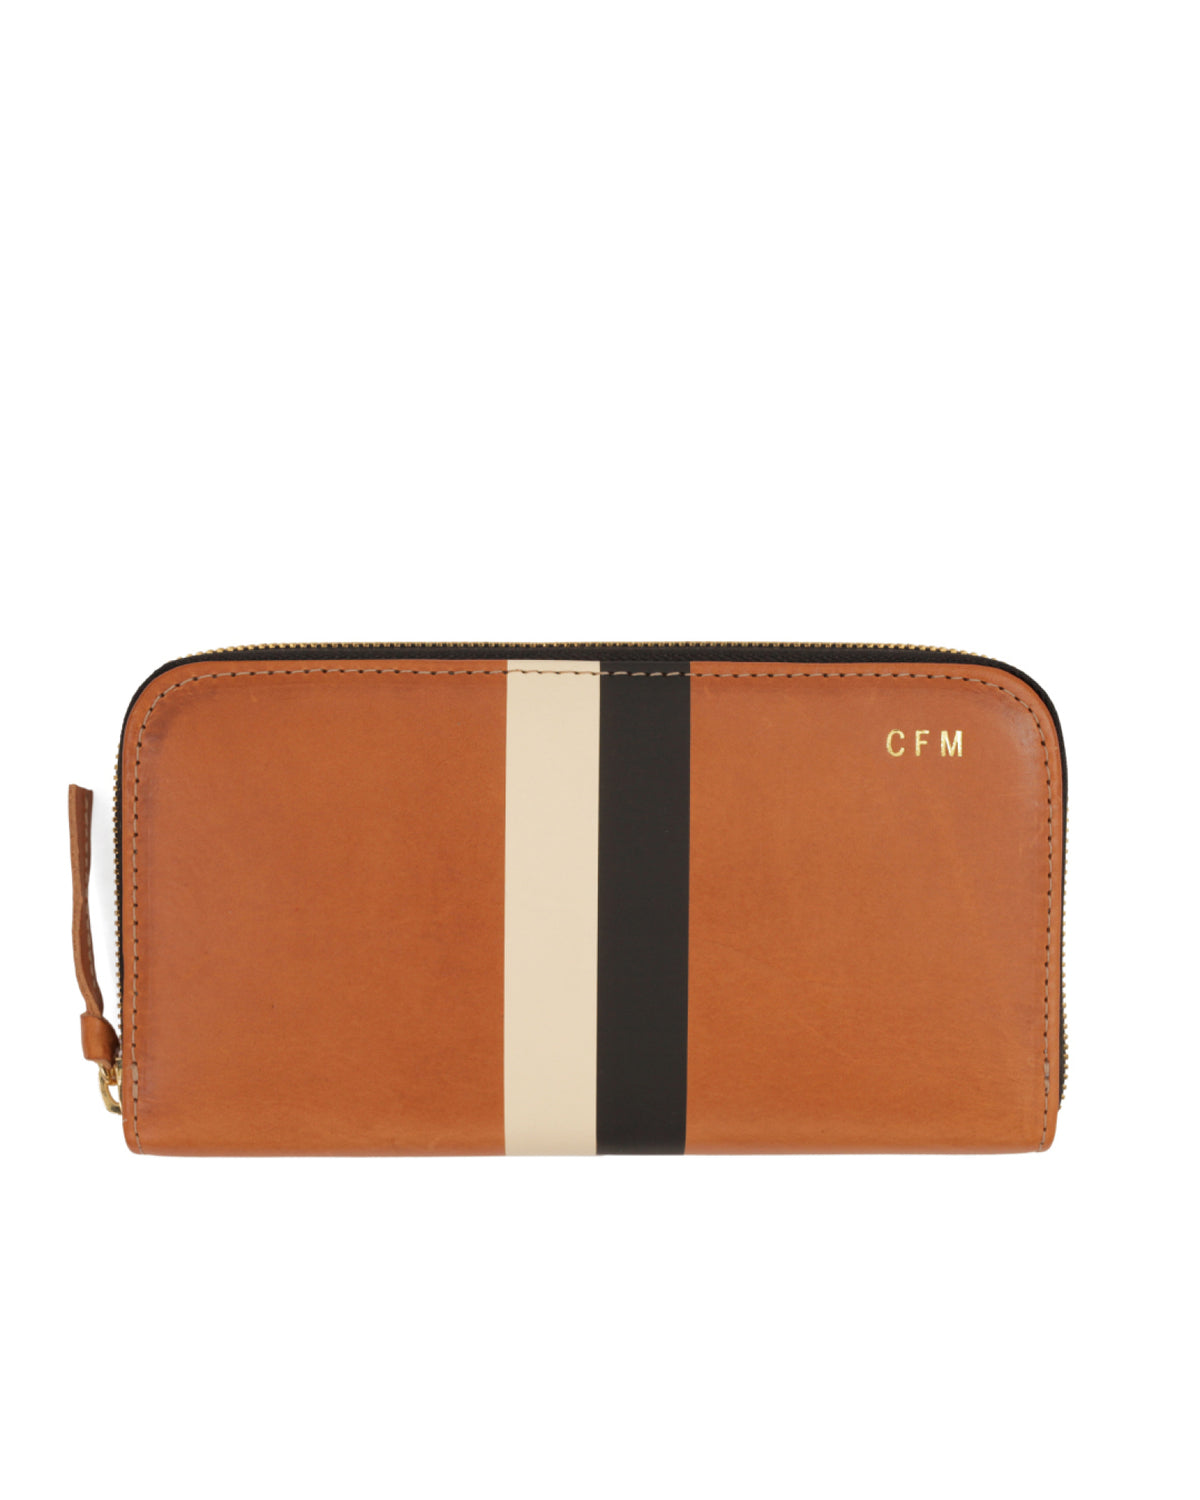 Image of a tan leather wallet with cream and black stripes in the center and a custom gold foil monogram at the top right of the wallet.